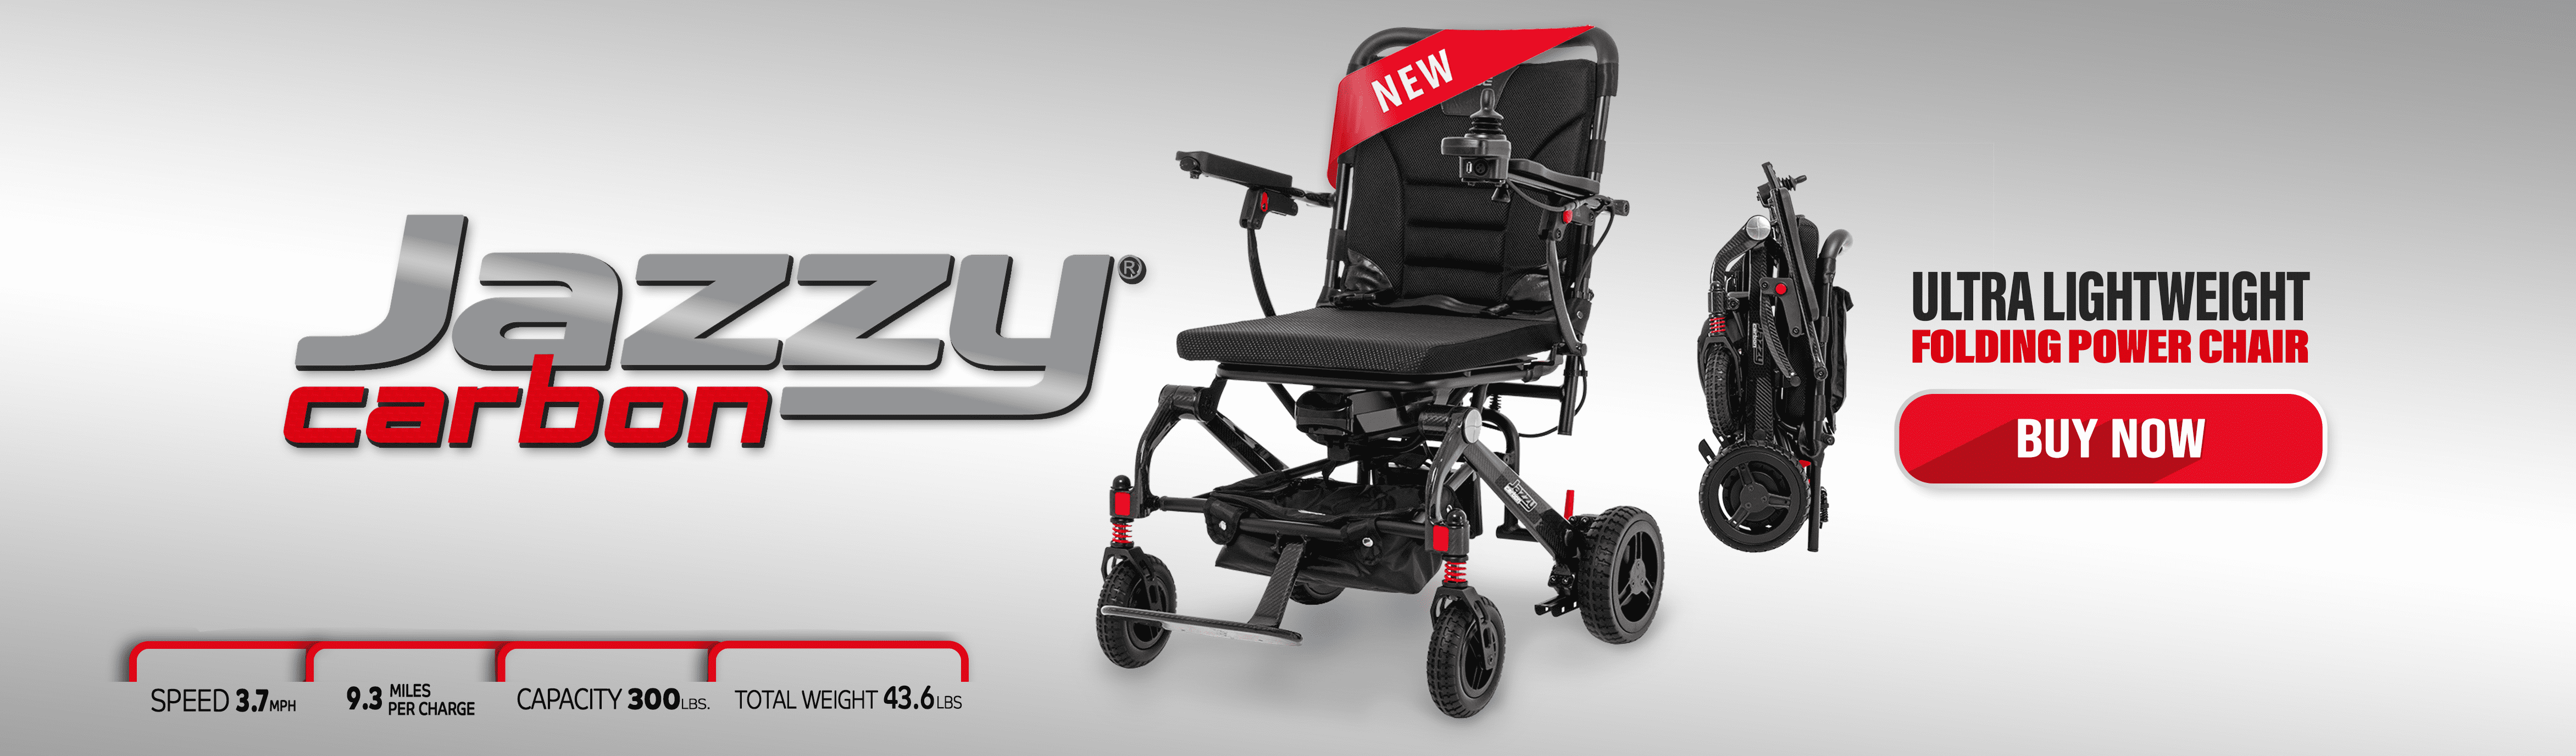 Jazzy Carbon Sale New electric powerchair